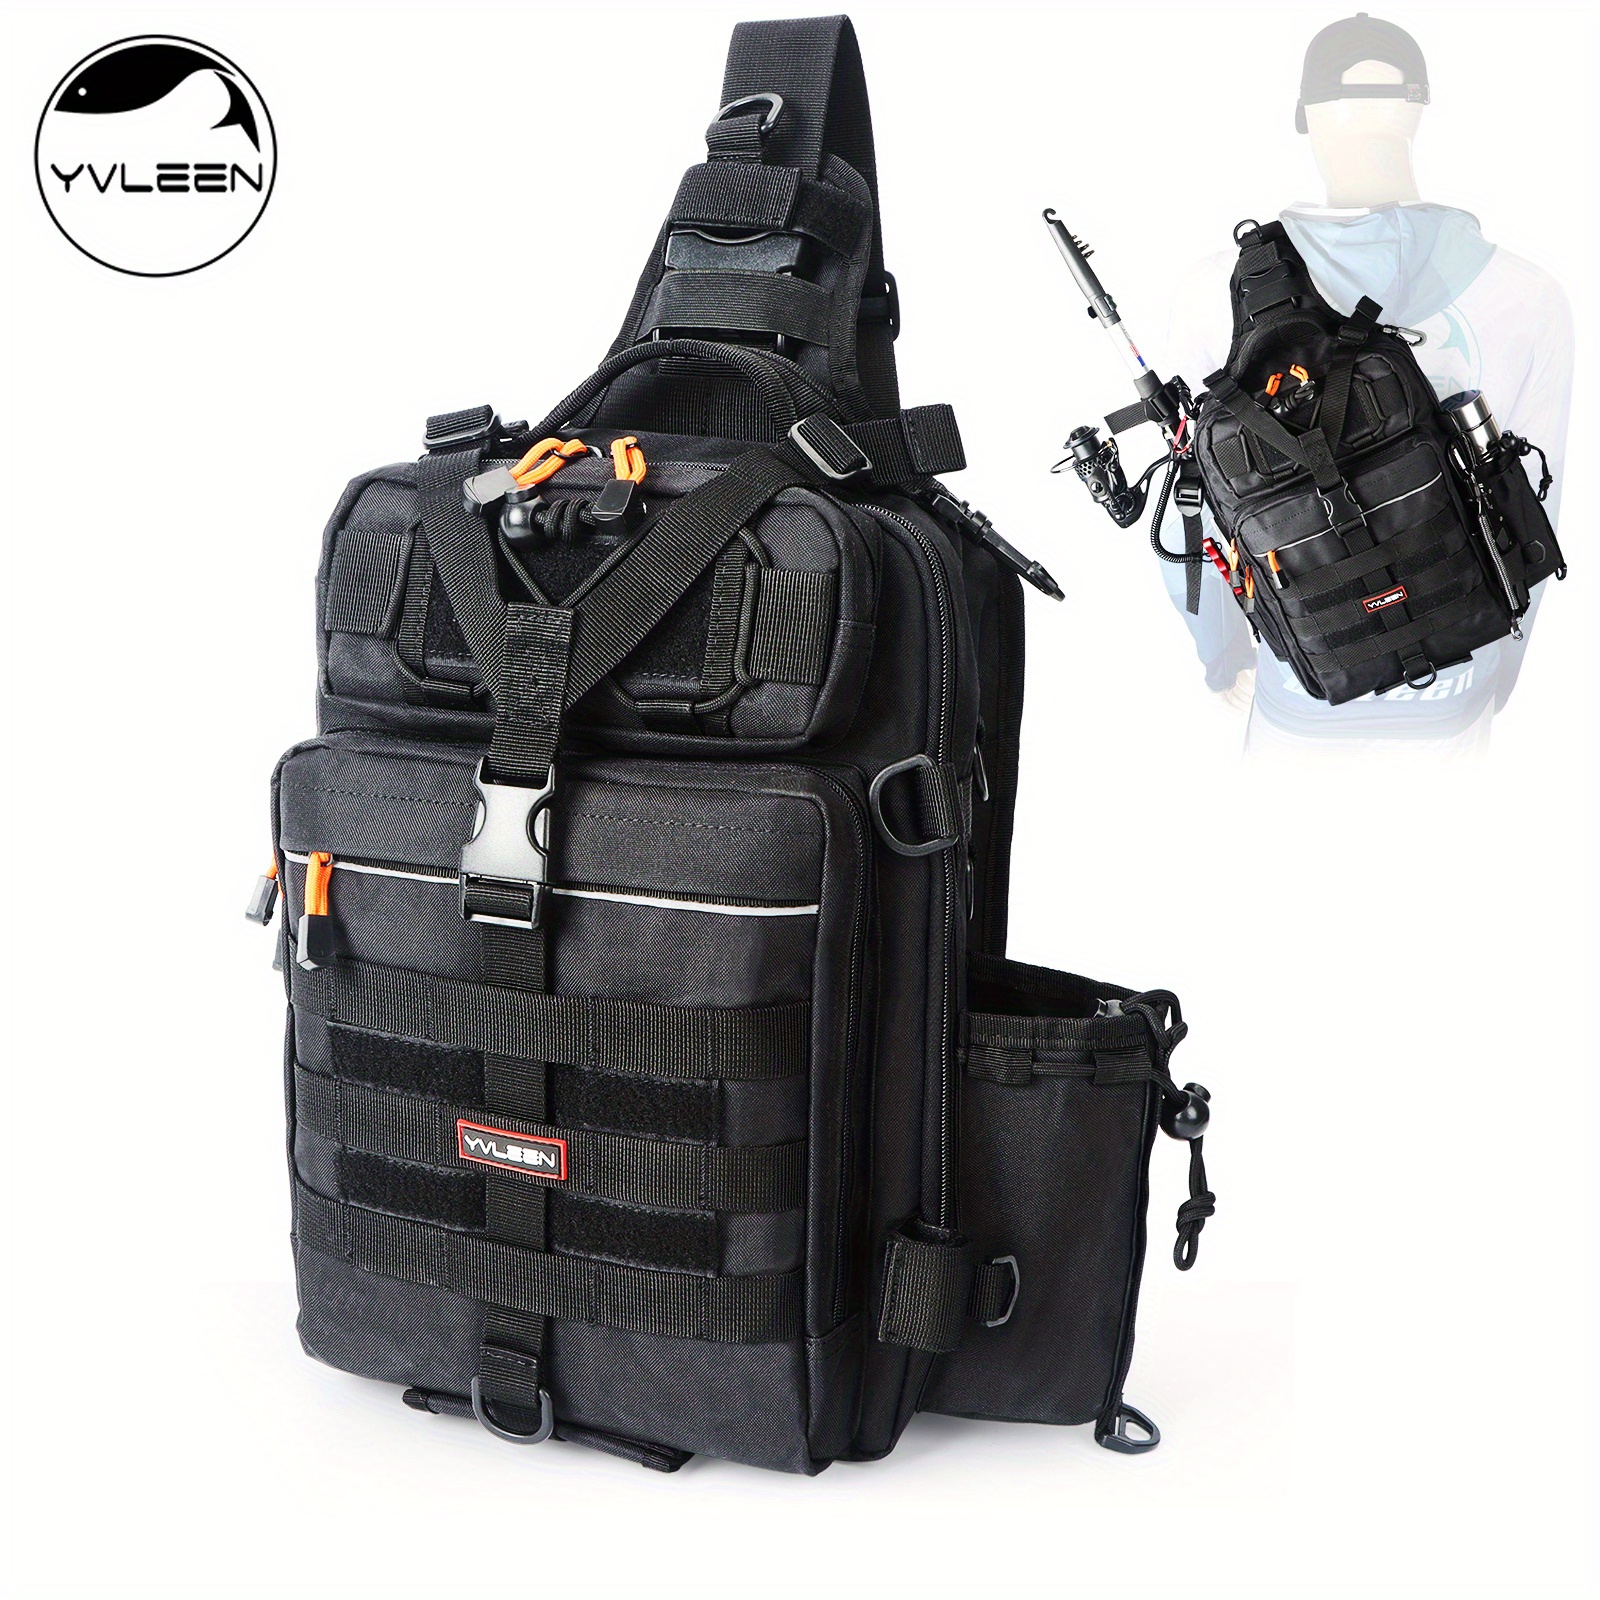 Fakespot  Yvleen Fishing Tackle Backpack Outdo Fake Review